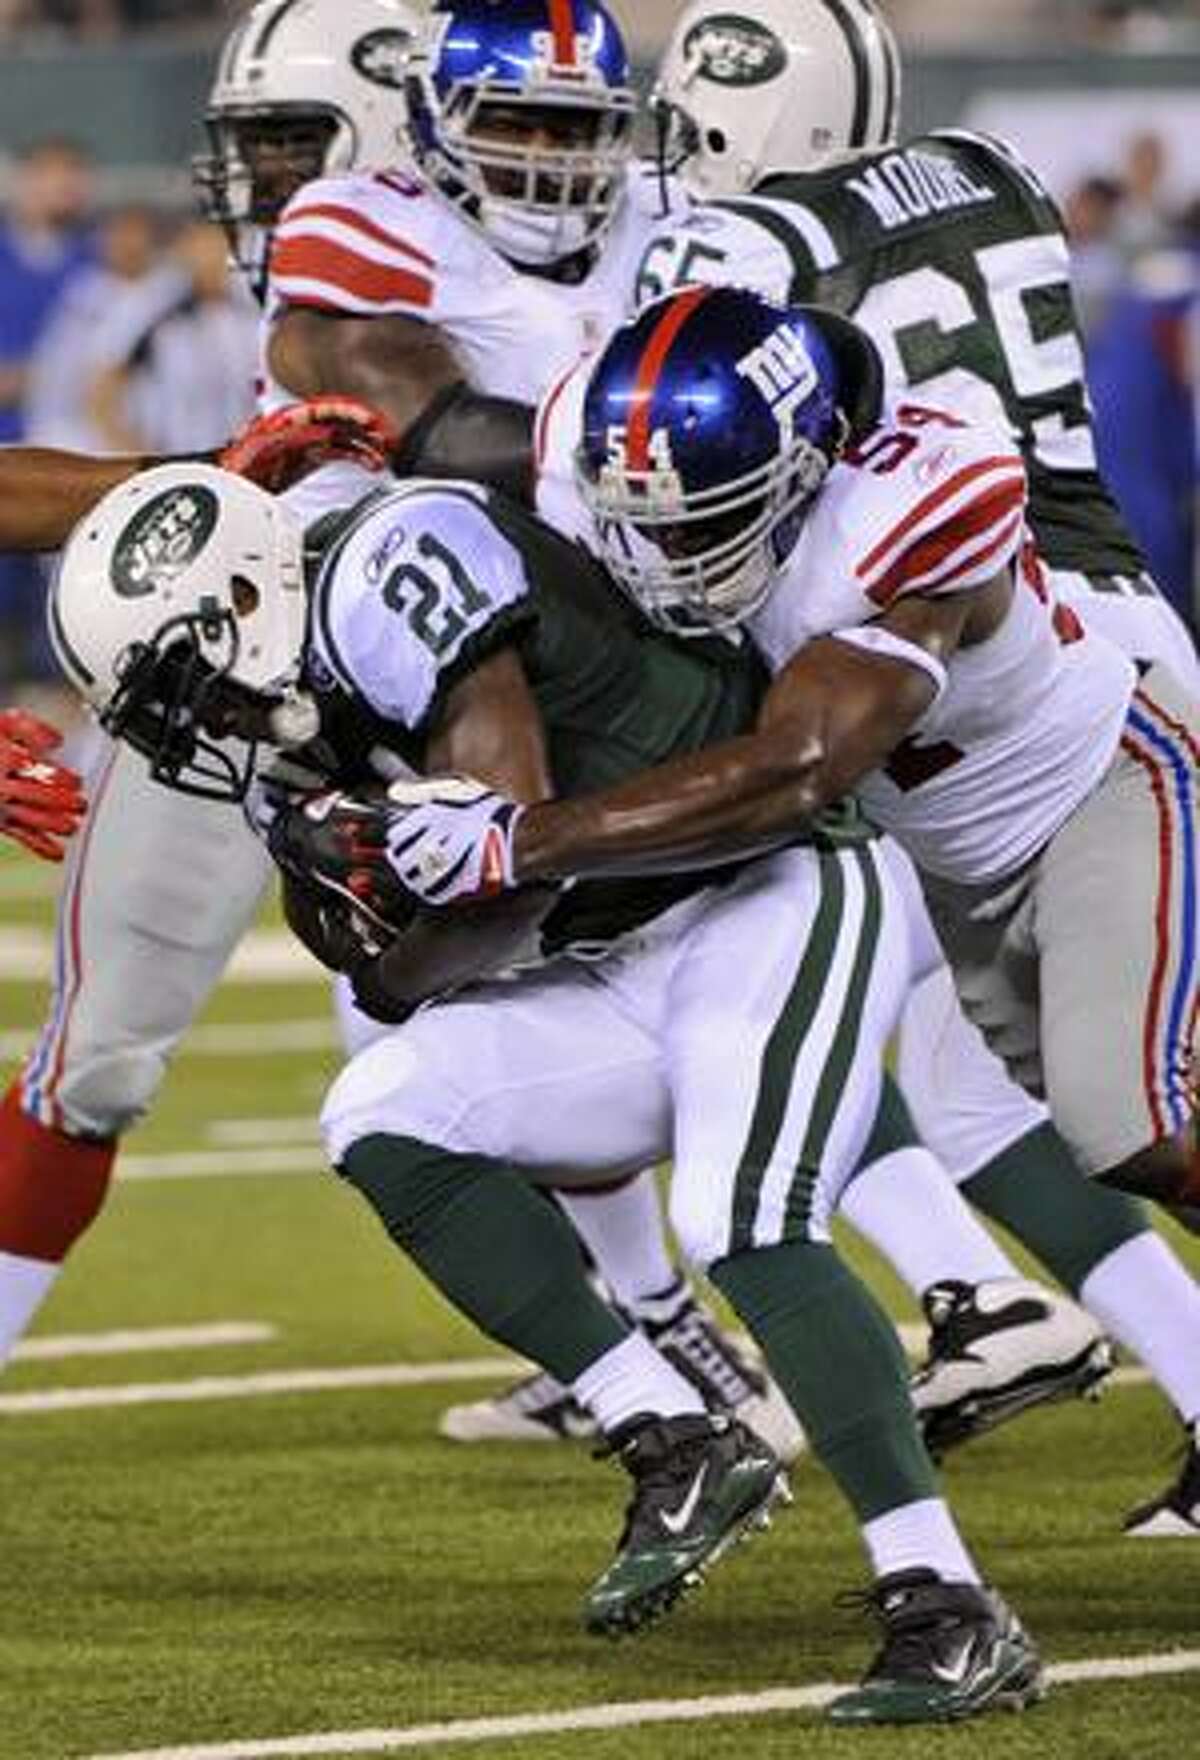 New York Jets' LaDanian Tomlinson is tackled by New York Giants' Jonathan Goff during the first quarter of a preseason NFL football game at New Meadowlands Stadium in East Rutherford, N.J., Monday, Aug. 16, 2010. (AP Photo/Bill Kostroun)